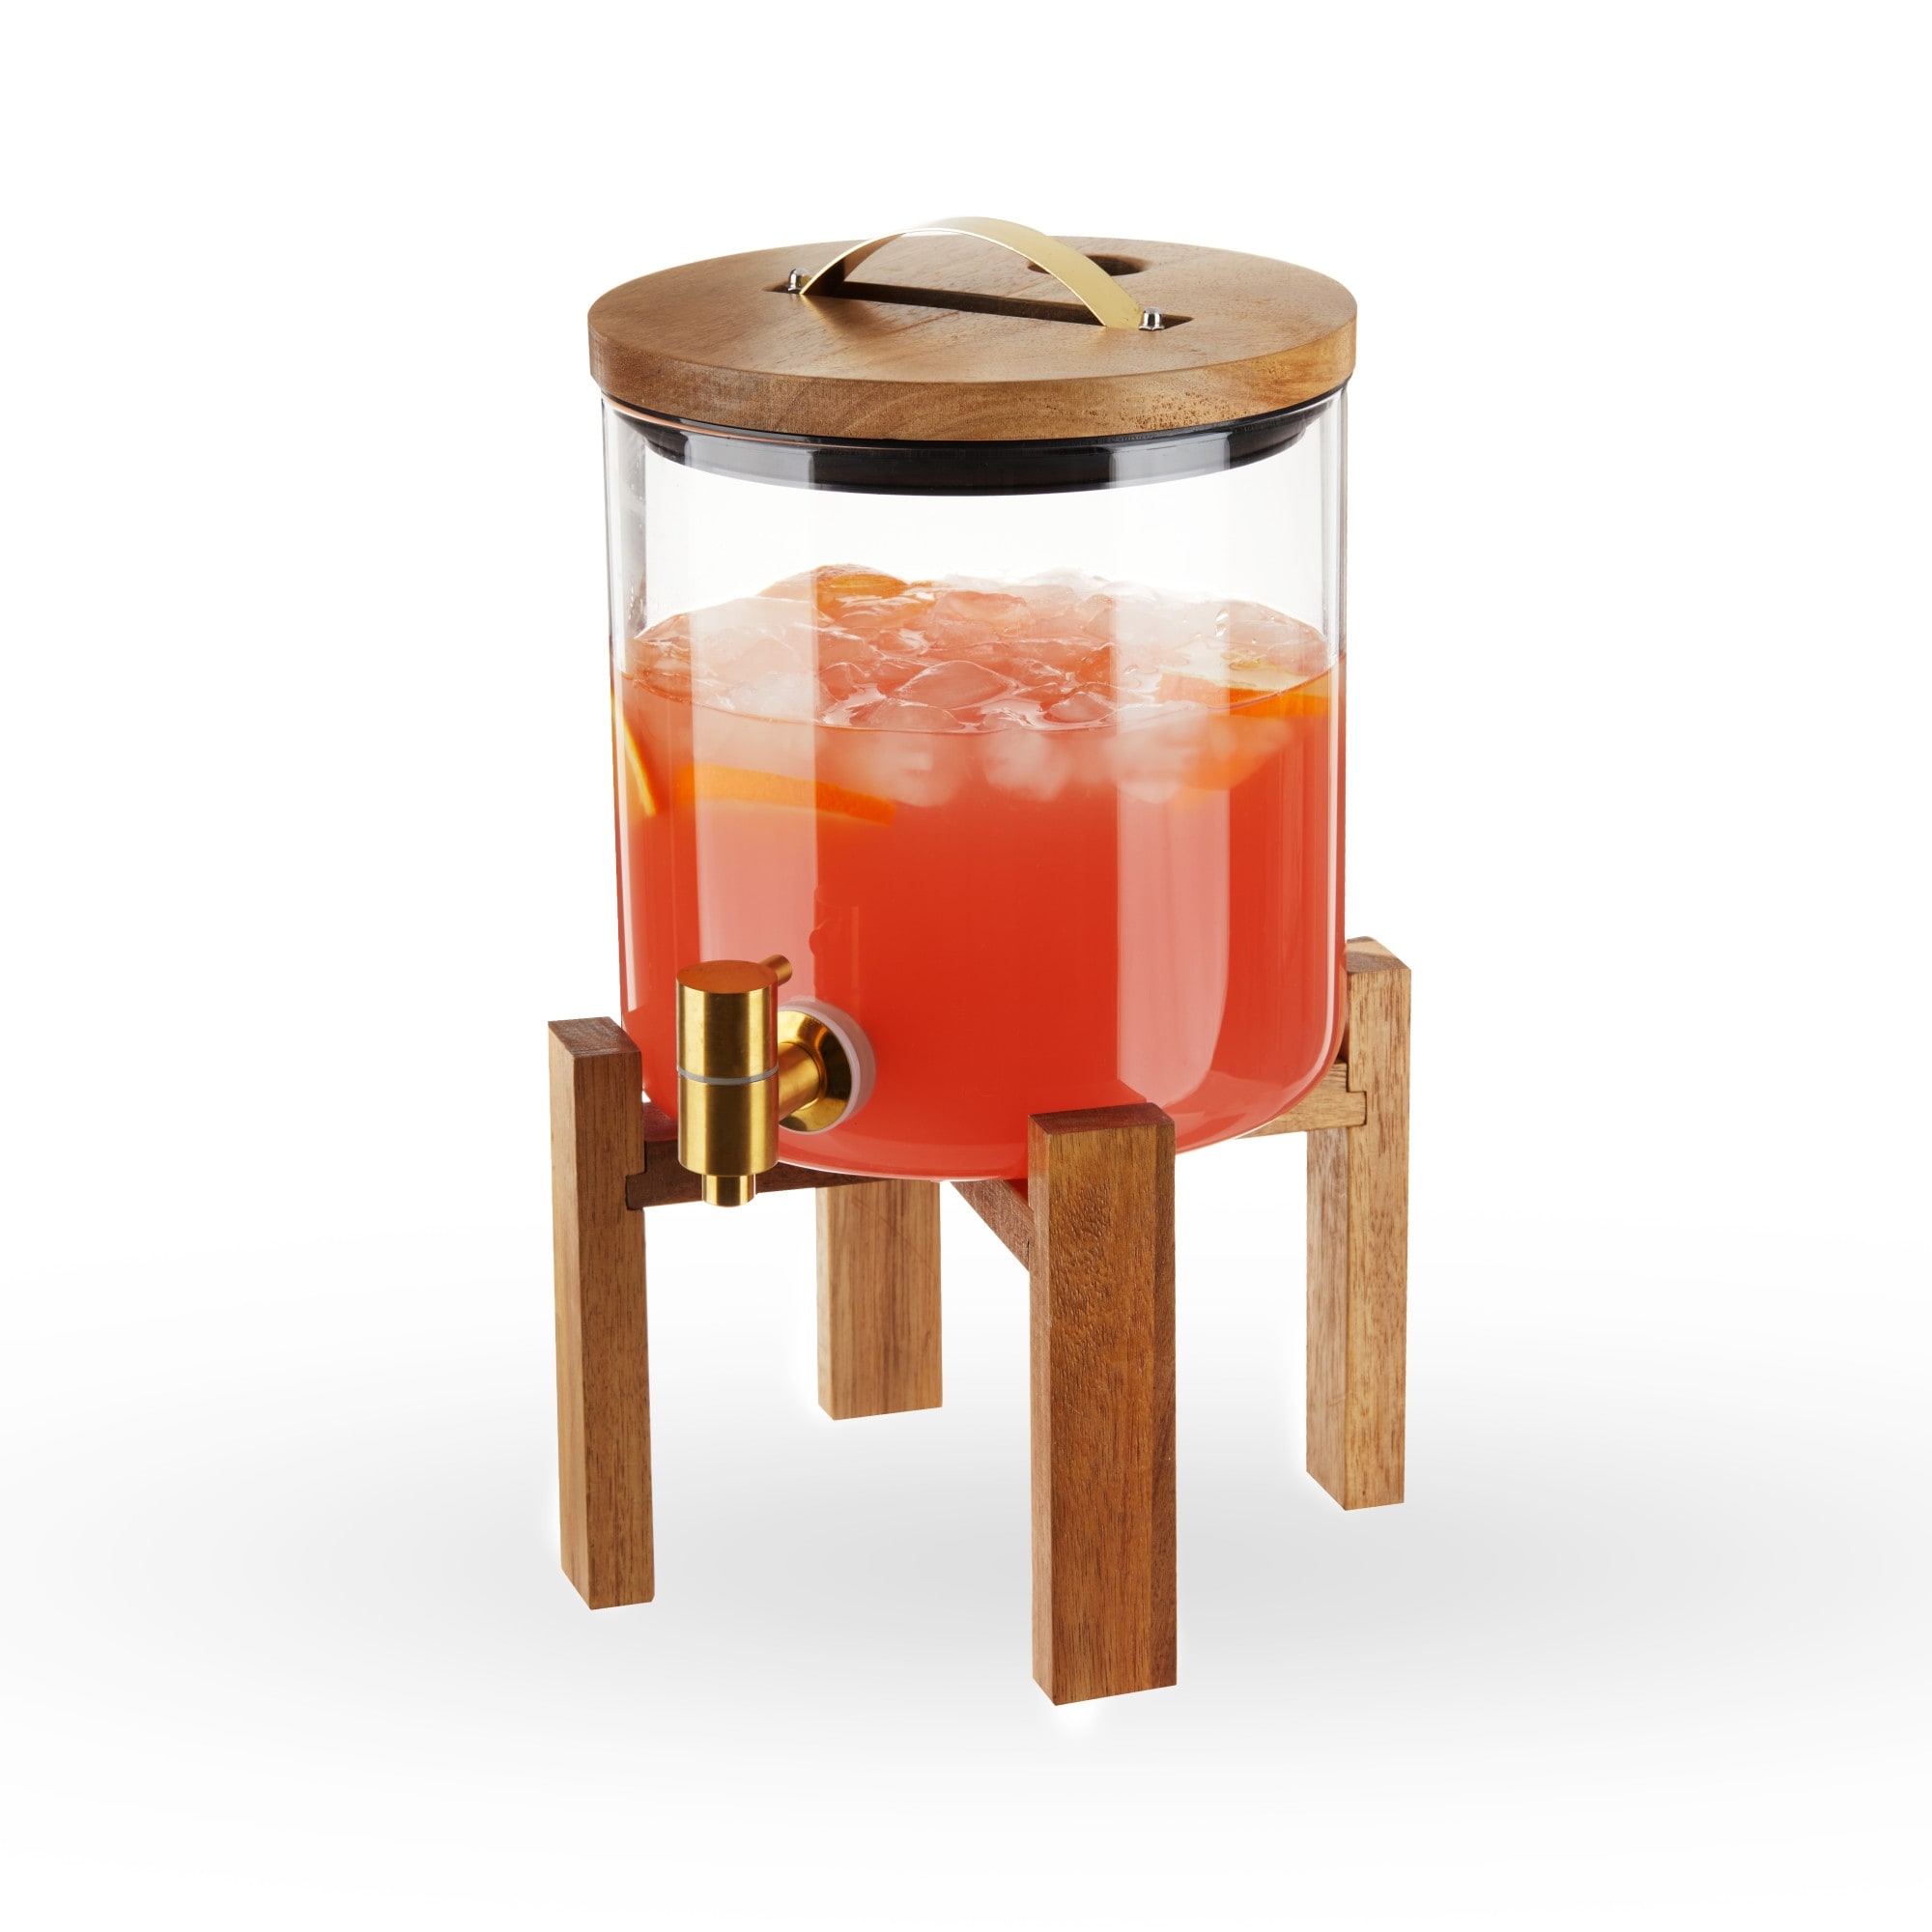 https://ak1.ostkcdn.com/images/products/is/images/direct/6b261573b653d3c0dfdd5310553bf530b6d5710c/Modern-Manor-Wood-%26-Glass-Drink-Dispenser-by-Twine-Living.jpg